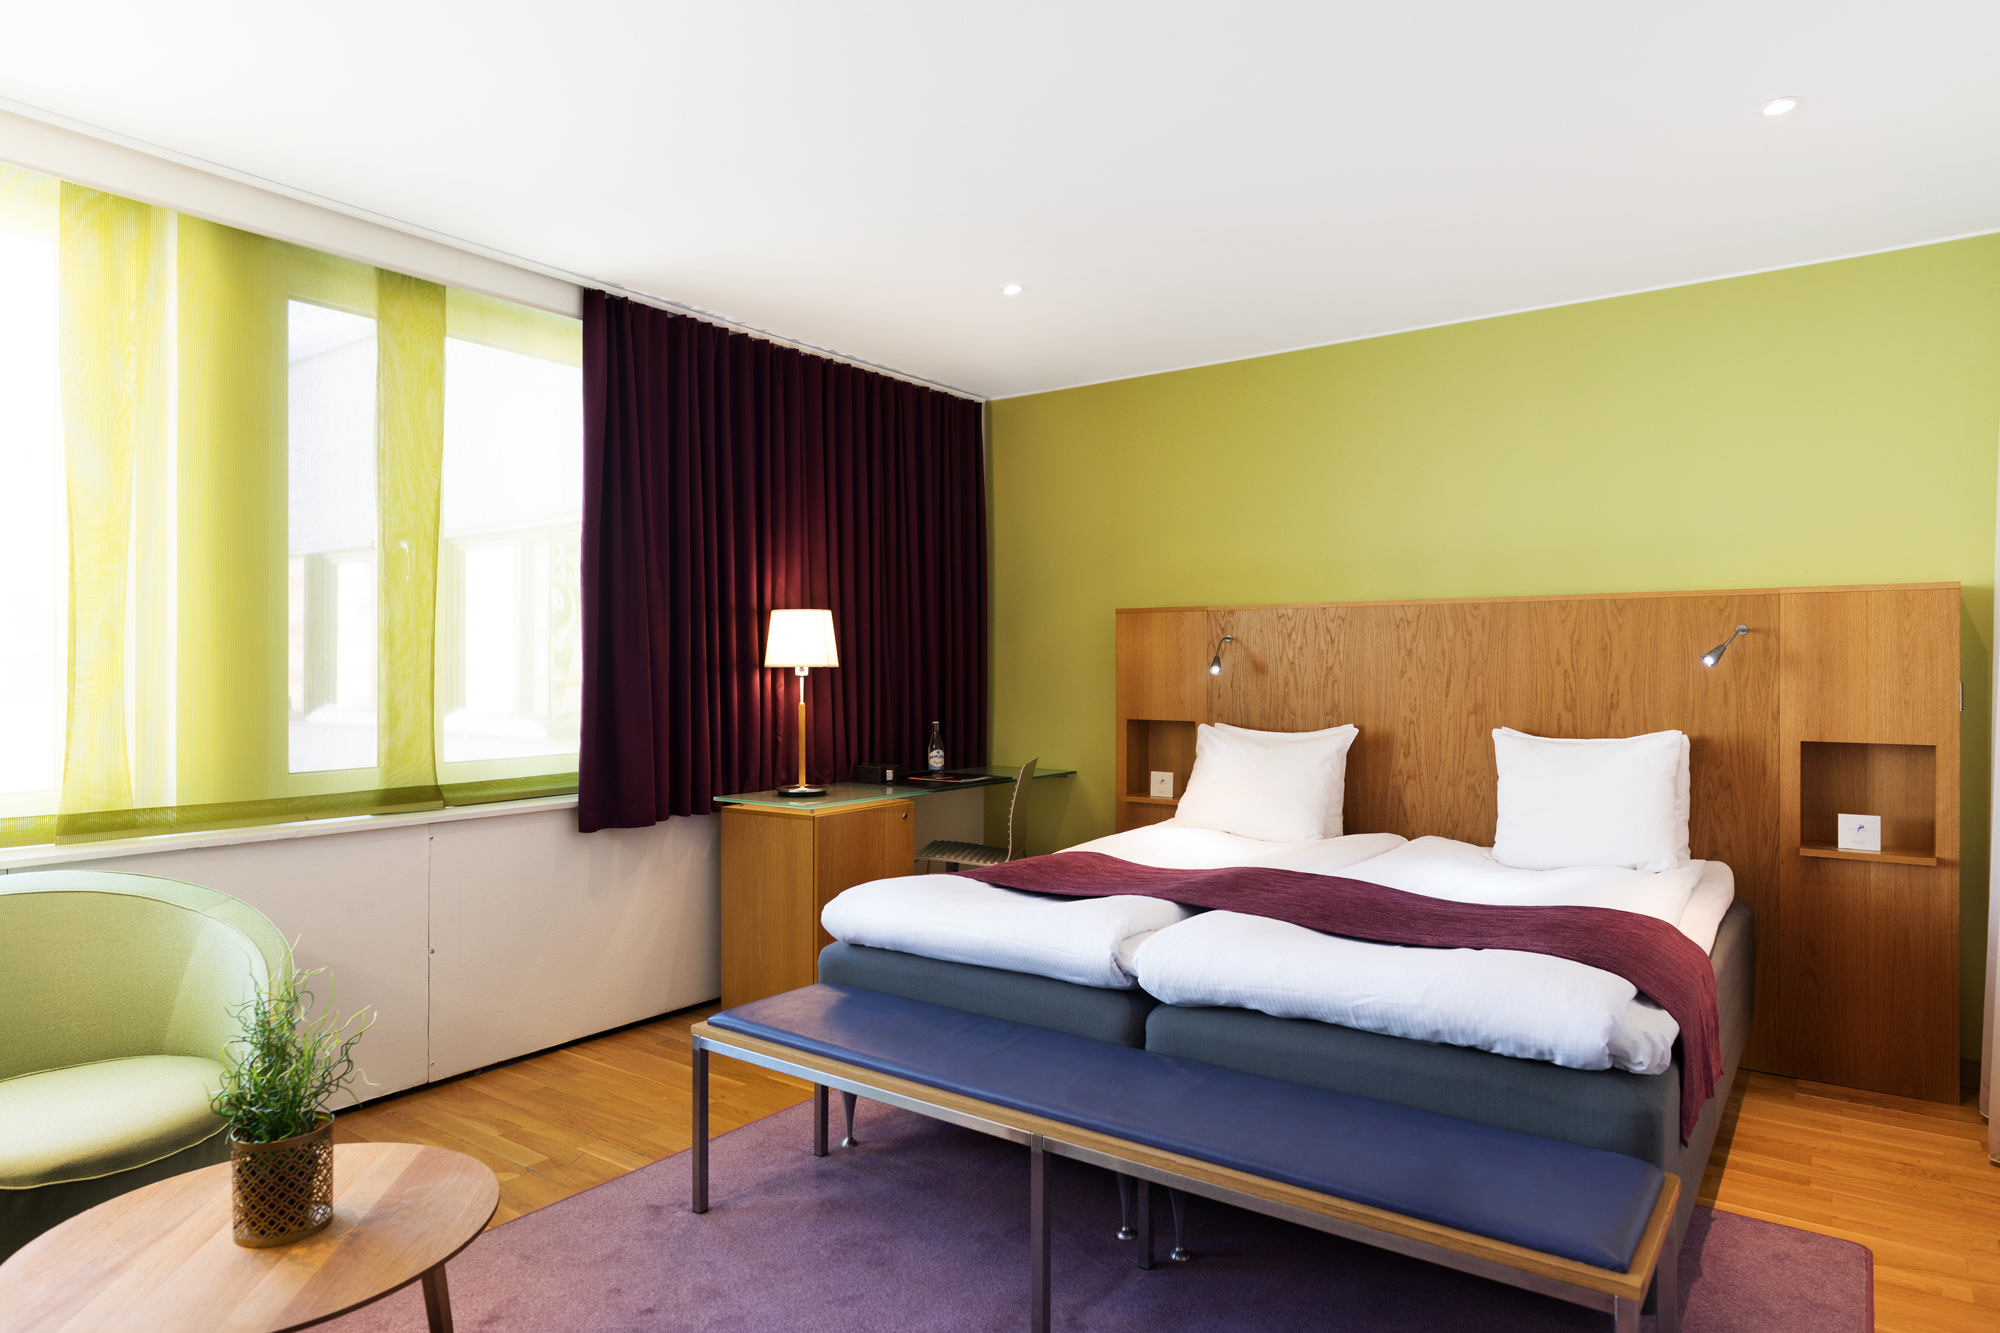 ProfilHotels Hotel Aveny <br/>78.58 ew <br/> <a href='http://vakantieoplossing.nl/outpage/?id=ad8bdcc5c0b7de2e51ce9ce1557b194c' target='_blank'>View Details</a>